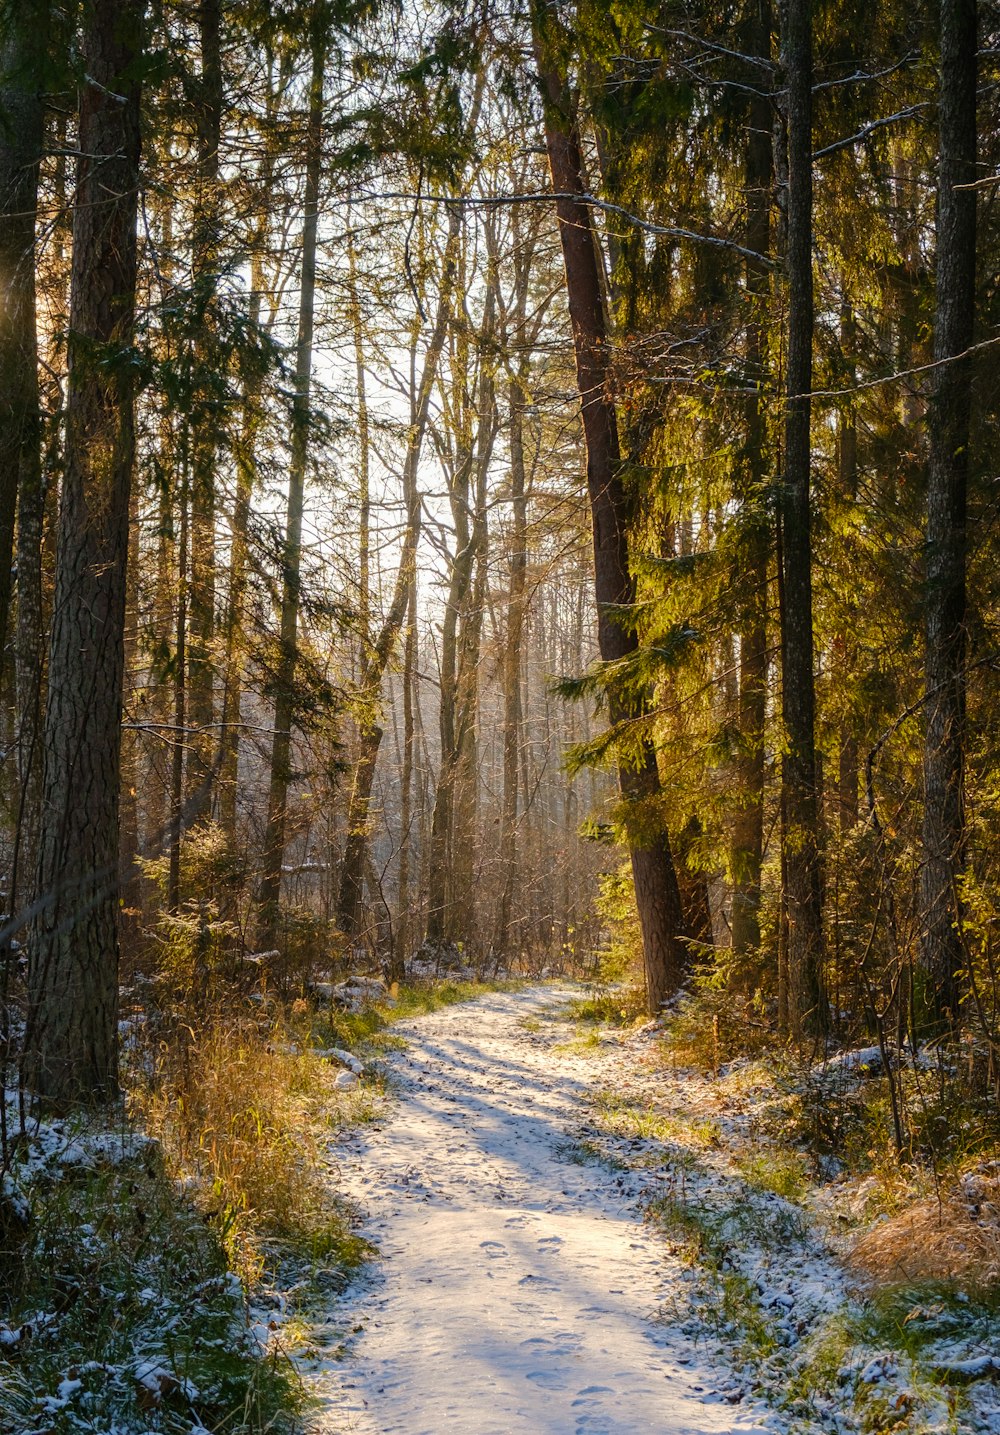 a snow covered path in a forest with tall trees